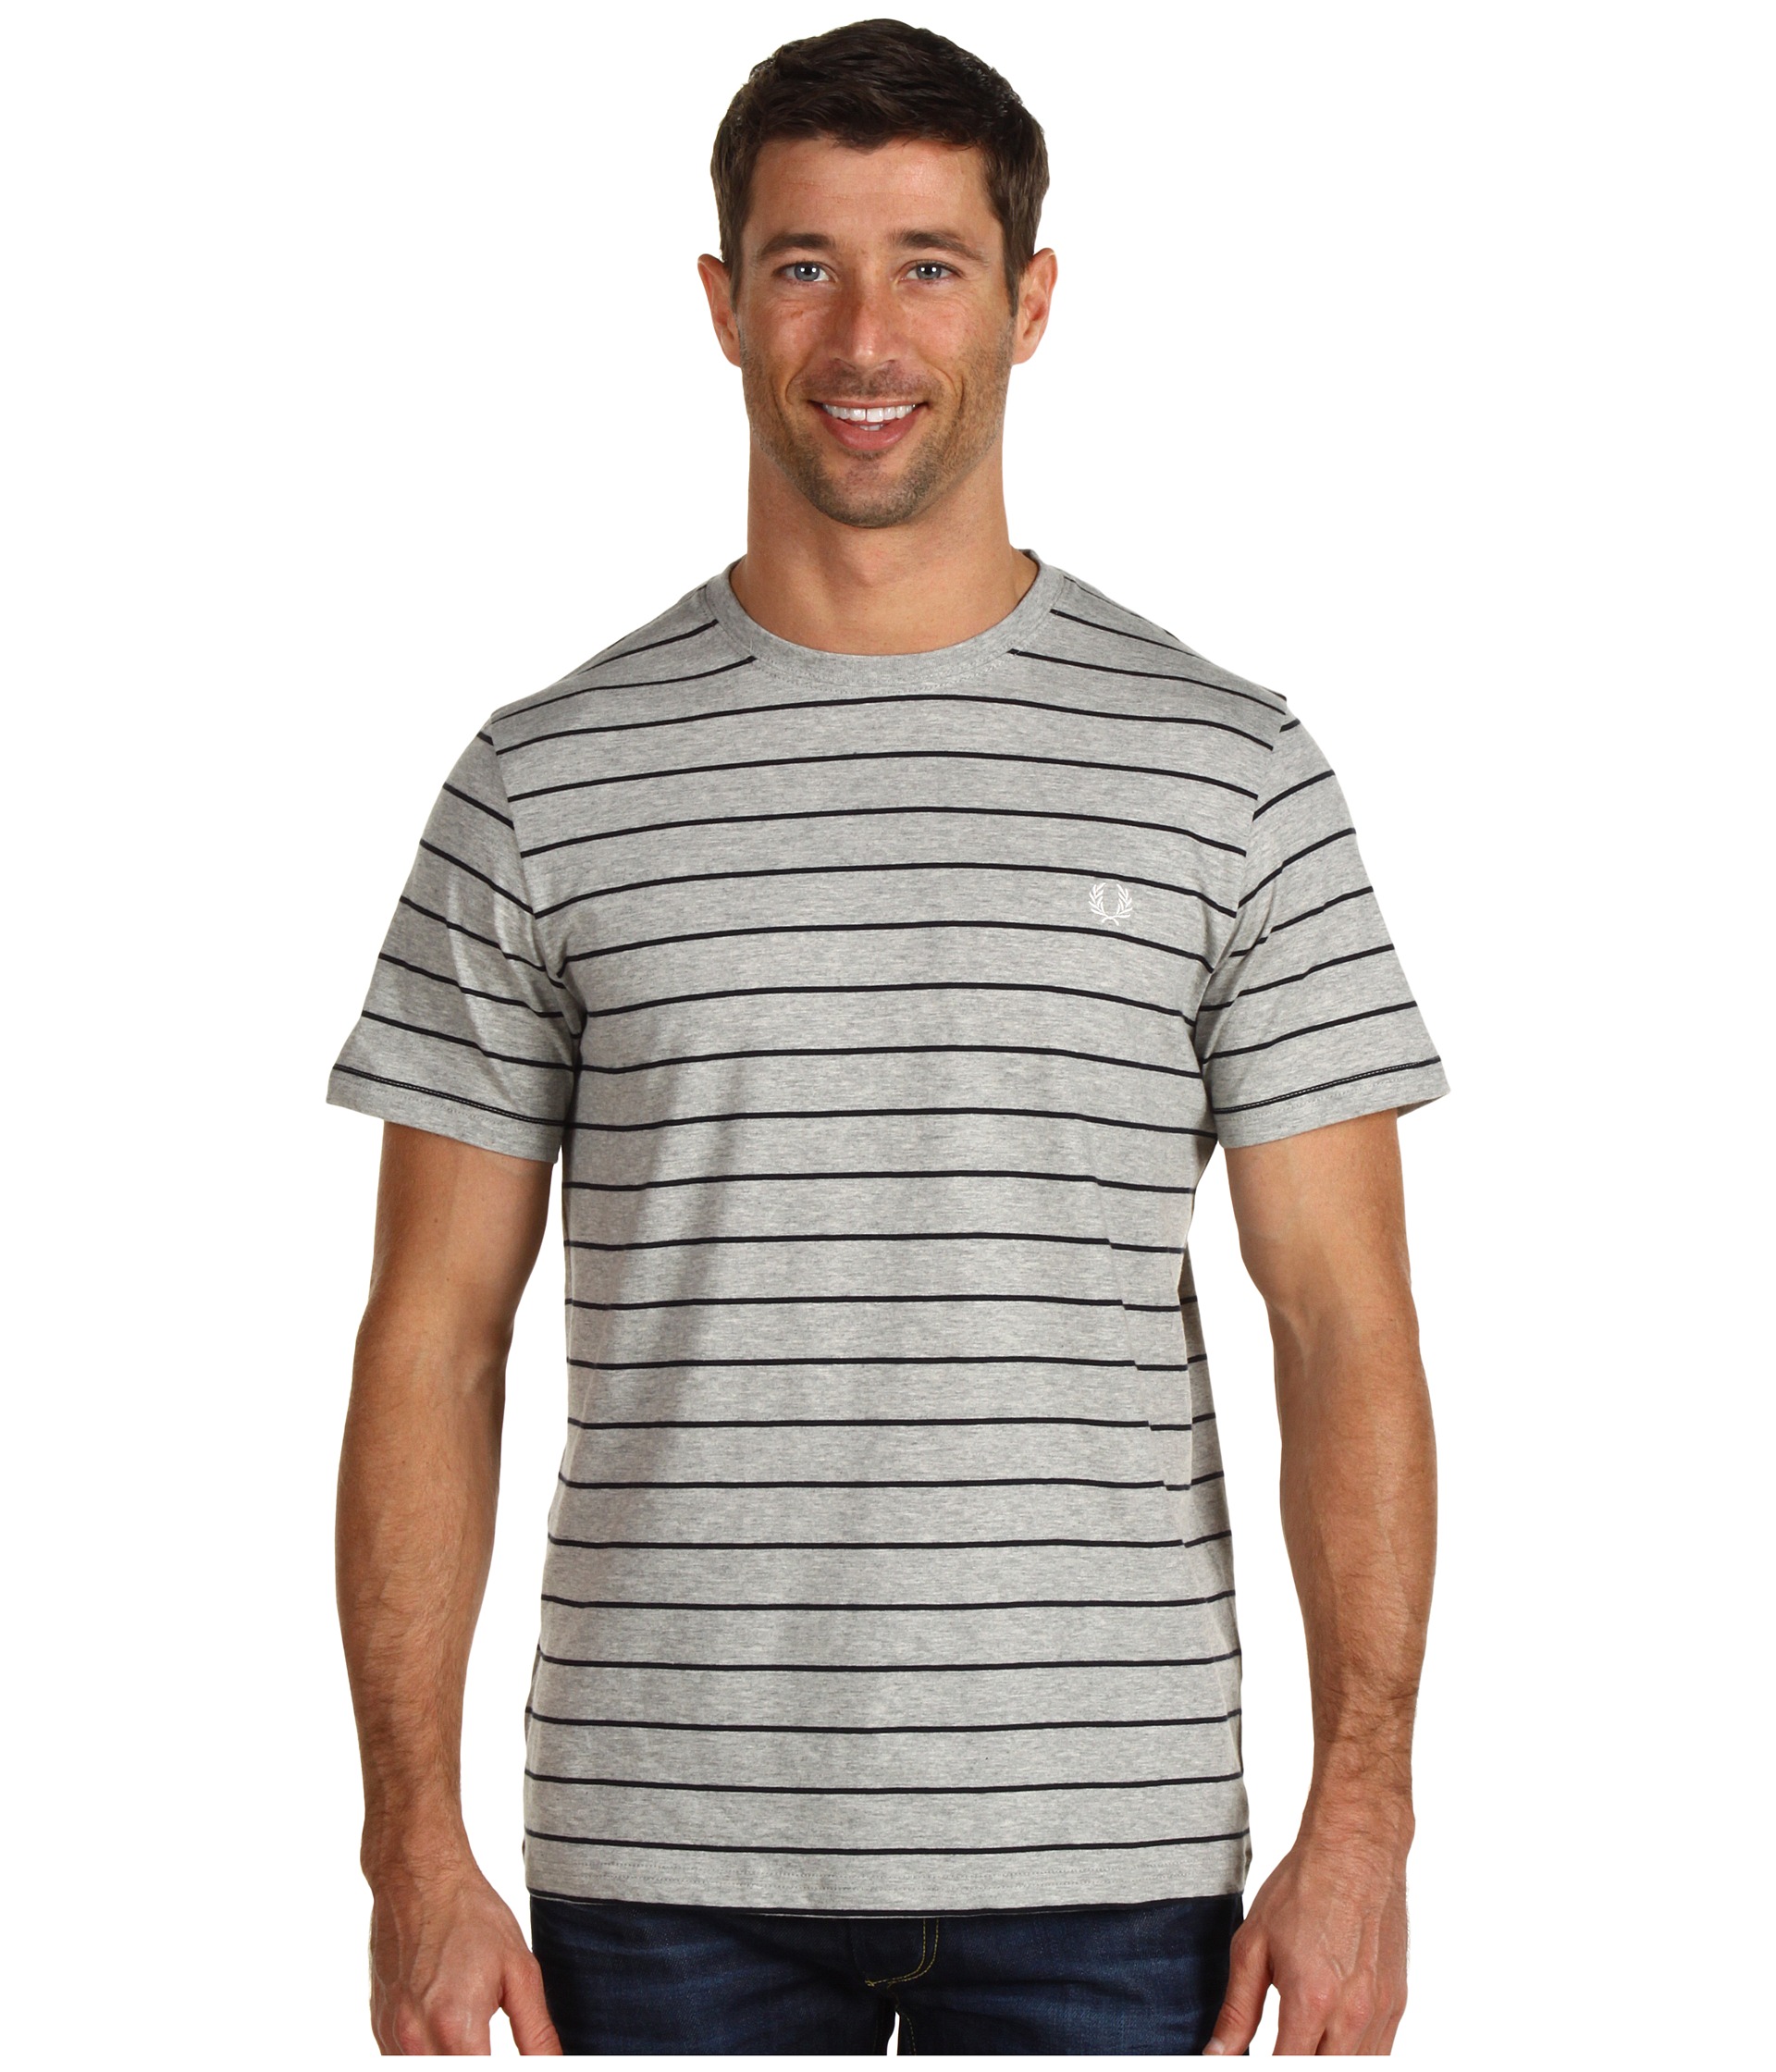 Fred Perry Fine Stripe Polo $65.99 (  MSRP $110.00)